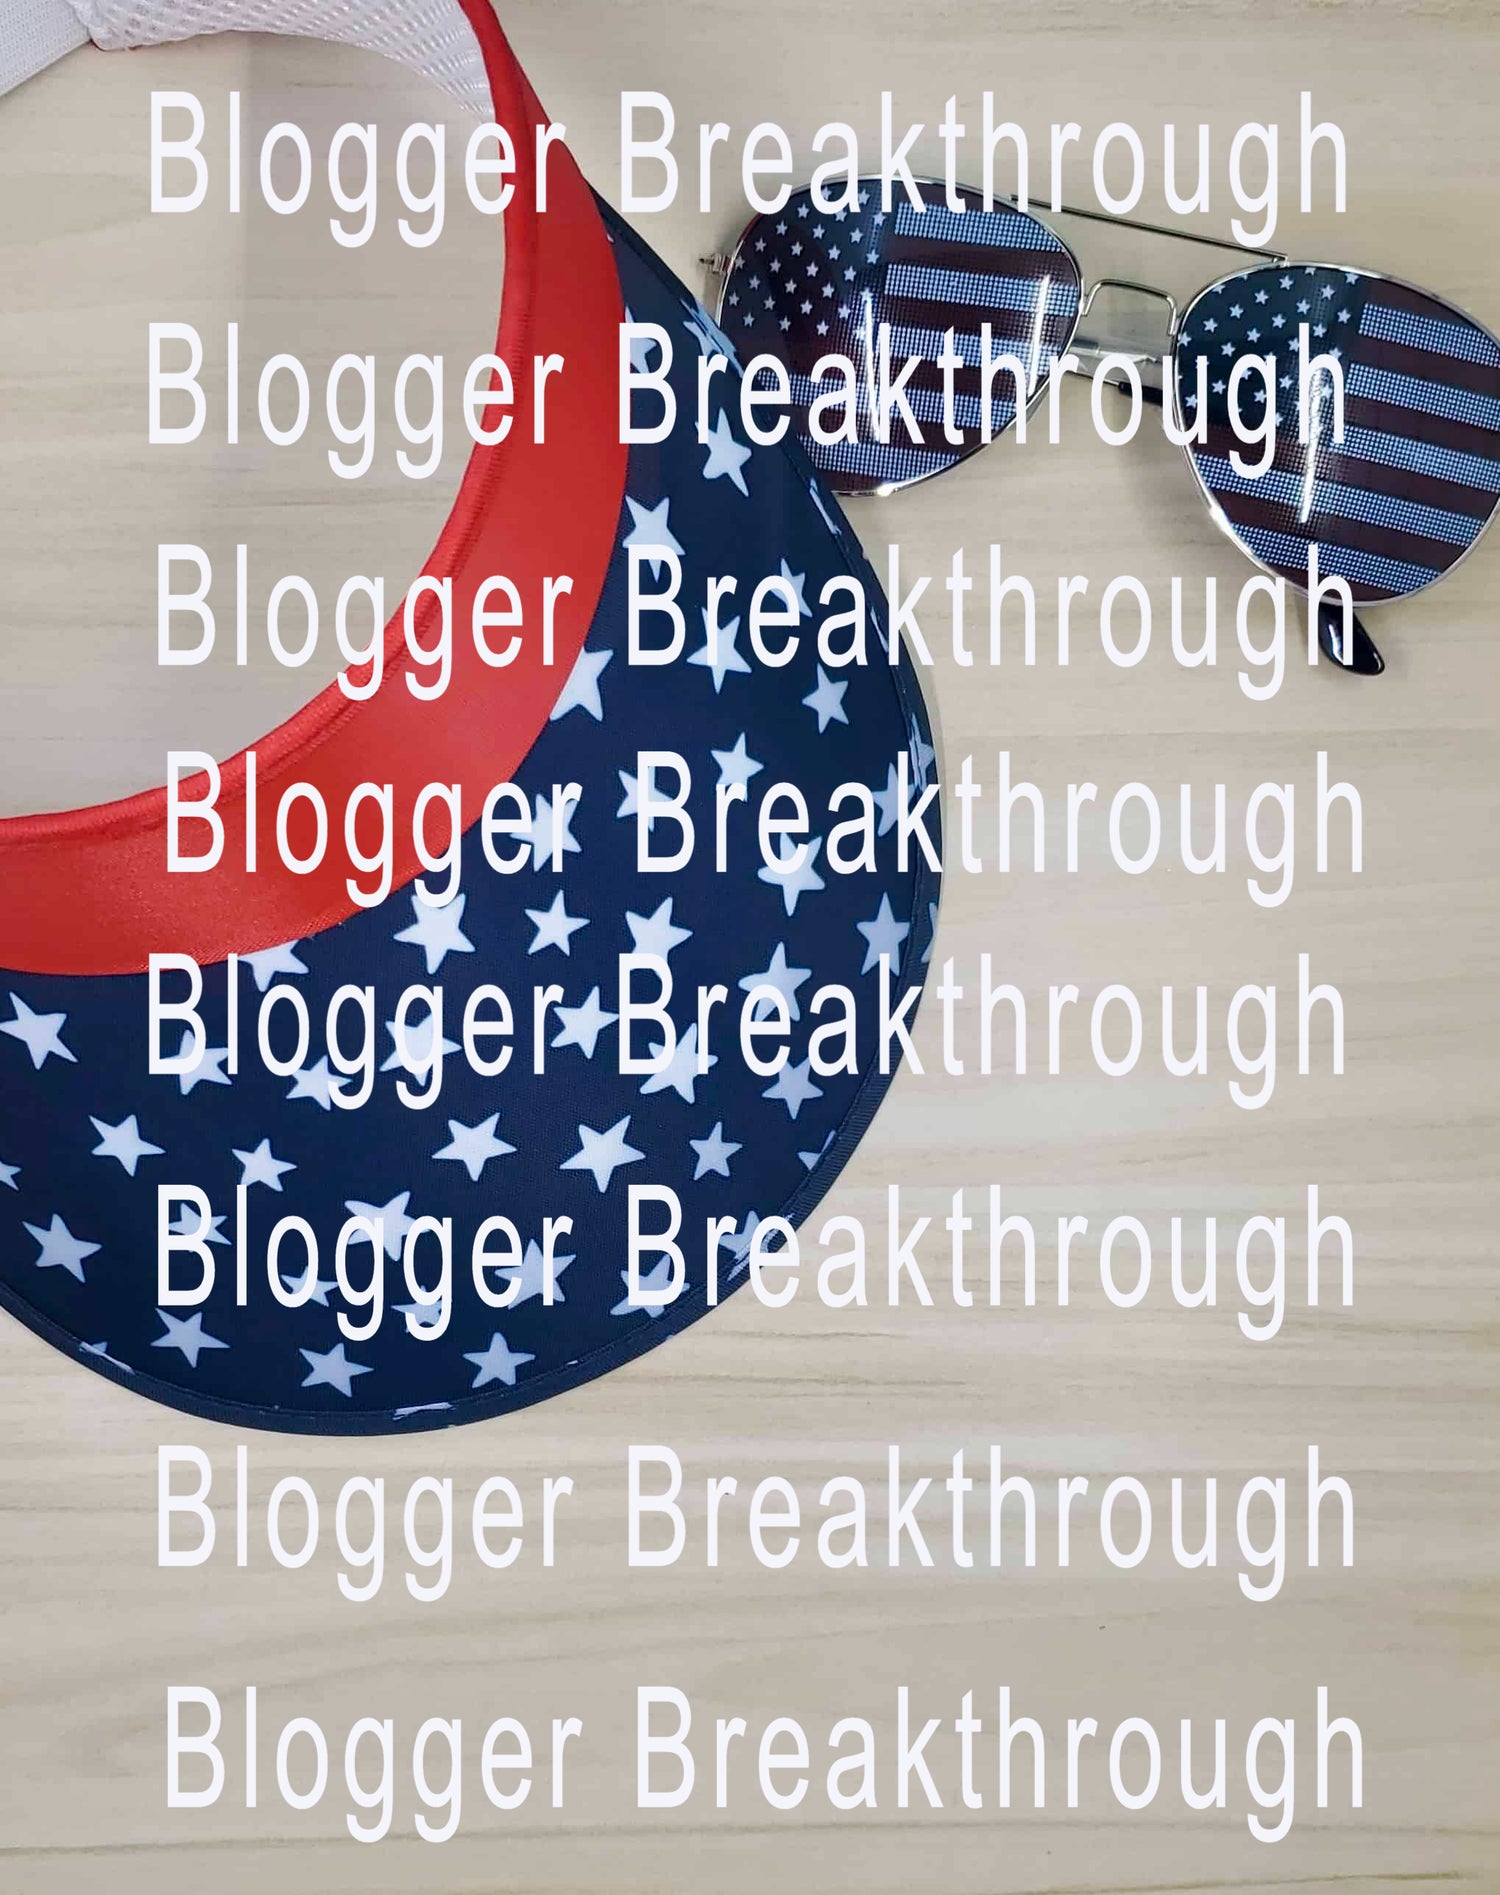 A pair of sunglasses with a stars and stripes pattern resting on a wooden surface, with a red and blue sports bra above and text overlays reading &quot;Blogger Breakthrough Summit Summer Themed Stock Photos (set of 10).